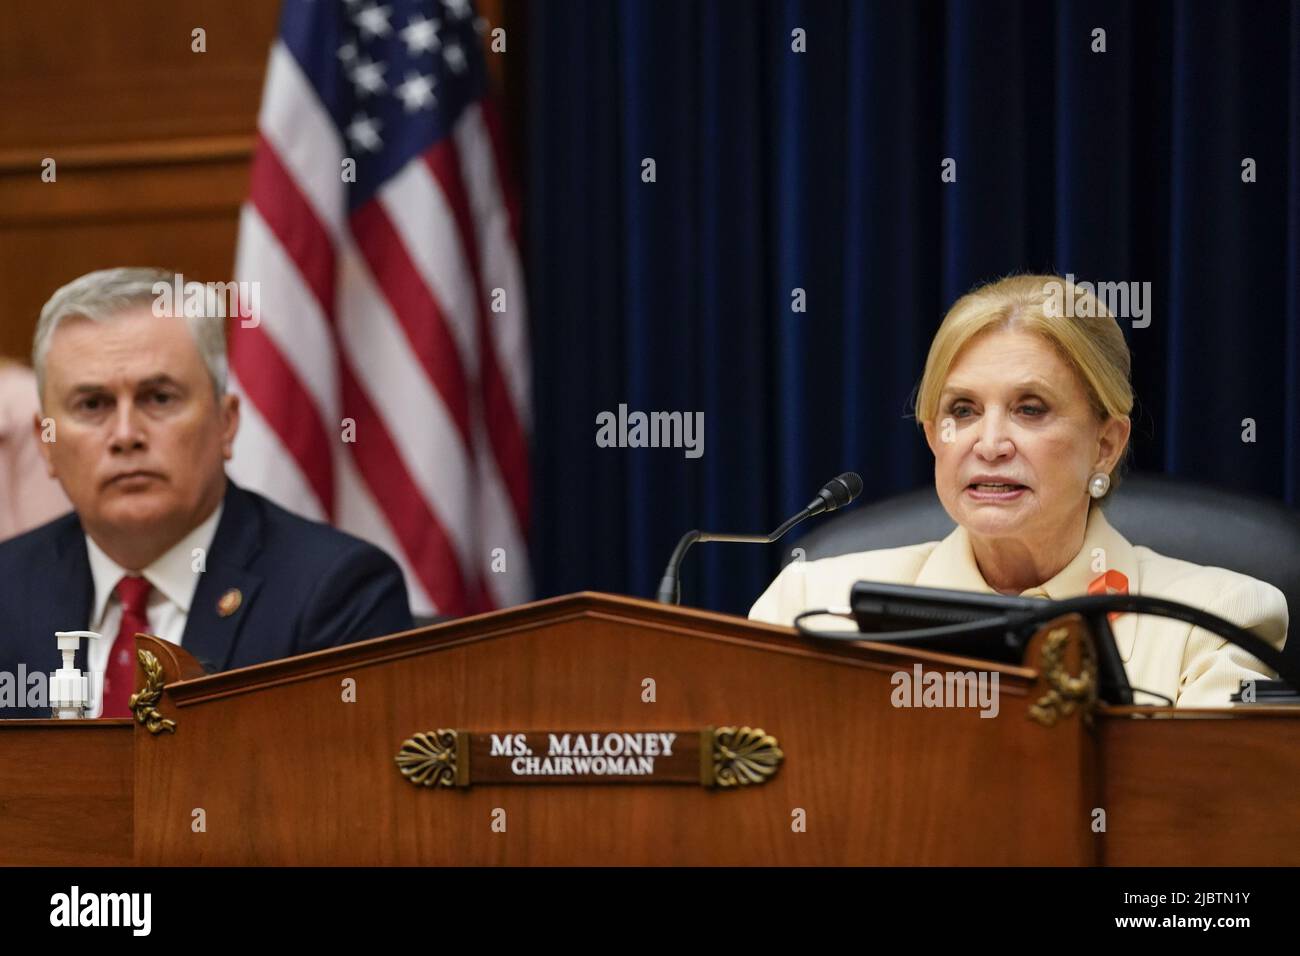 Washington, United States. 08th June, 2022. Chairwoman Rep. Carolyn Maloney, D-NY, speaks as Ranking member Rep. James Comer Jr., R-KY, (R) listens during a House Committee on Oversight and Reform hearing on gun violence on Capitol Hill in Washington, DC on Wednesday, June 8, 2022. Pool photo by Andrew Harnik/UPI Credit: UPI/Alamy Live News Stock Photo